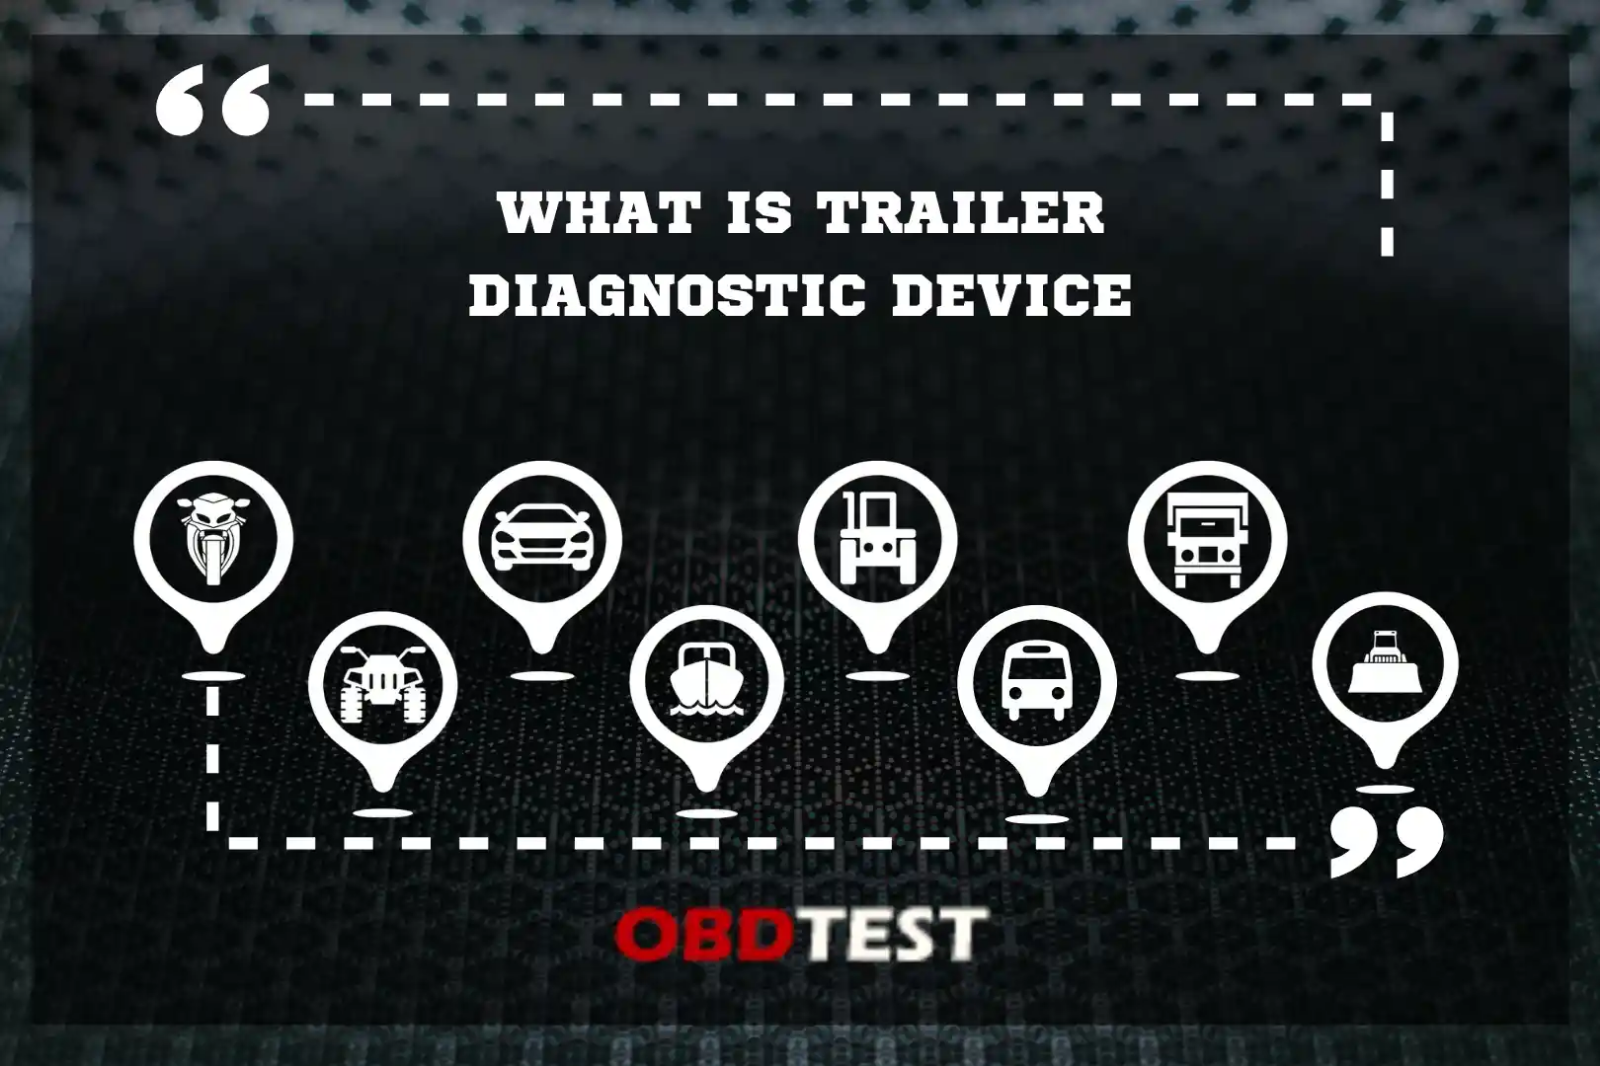 What is Trailer Diagnostic Device?